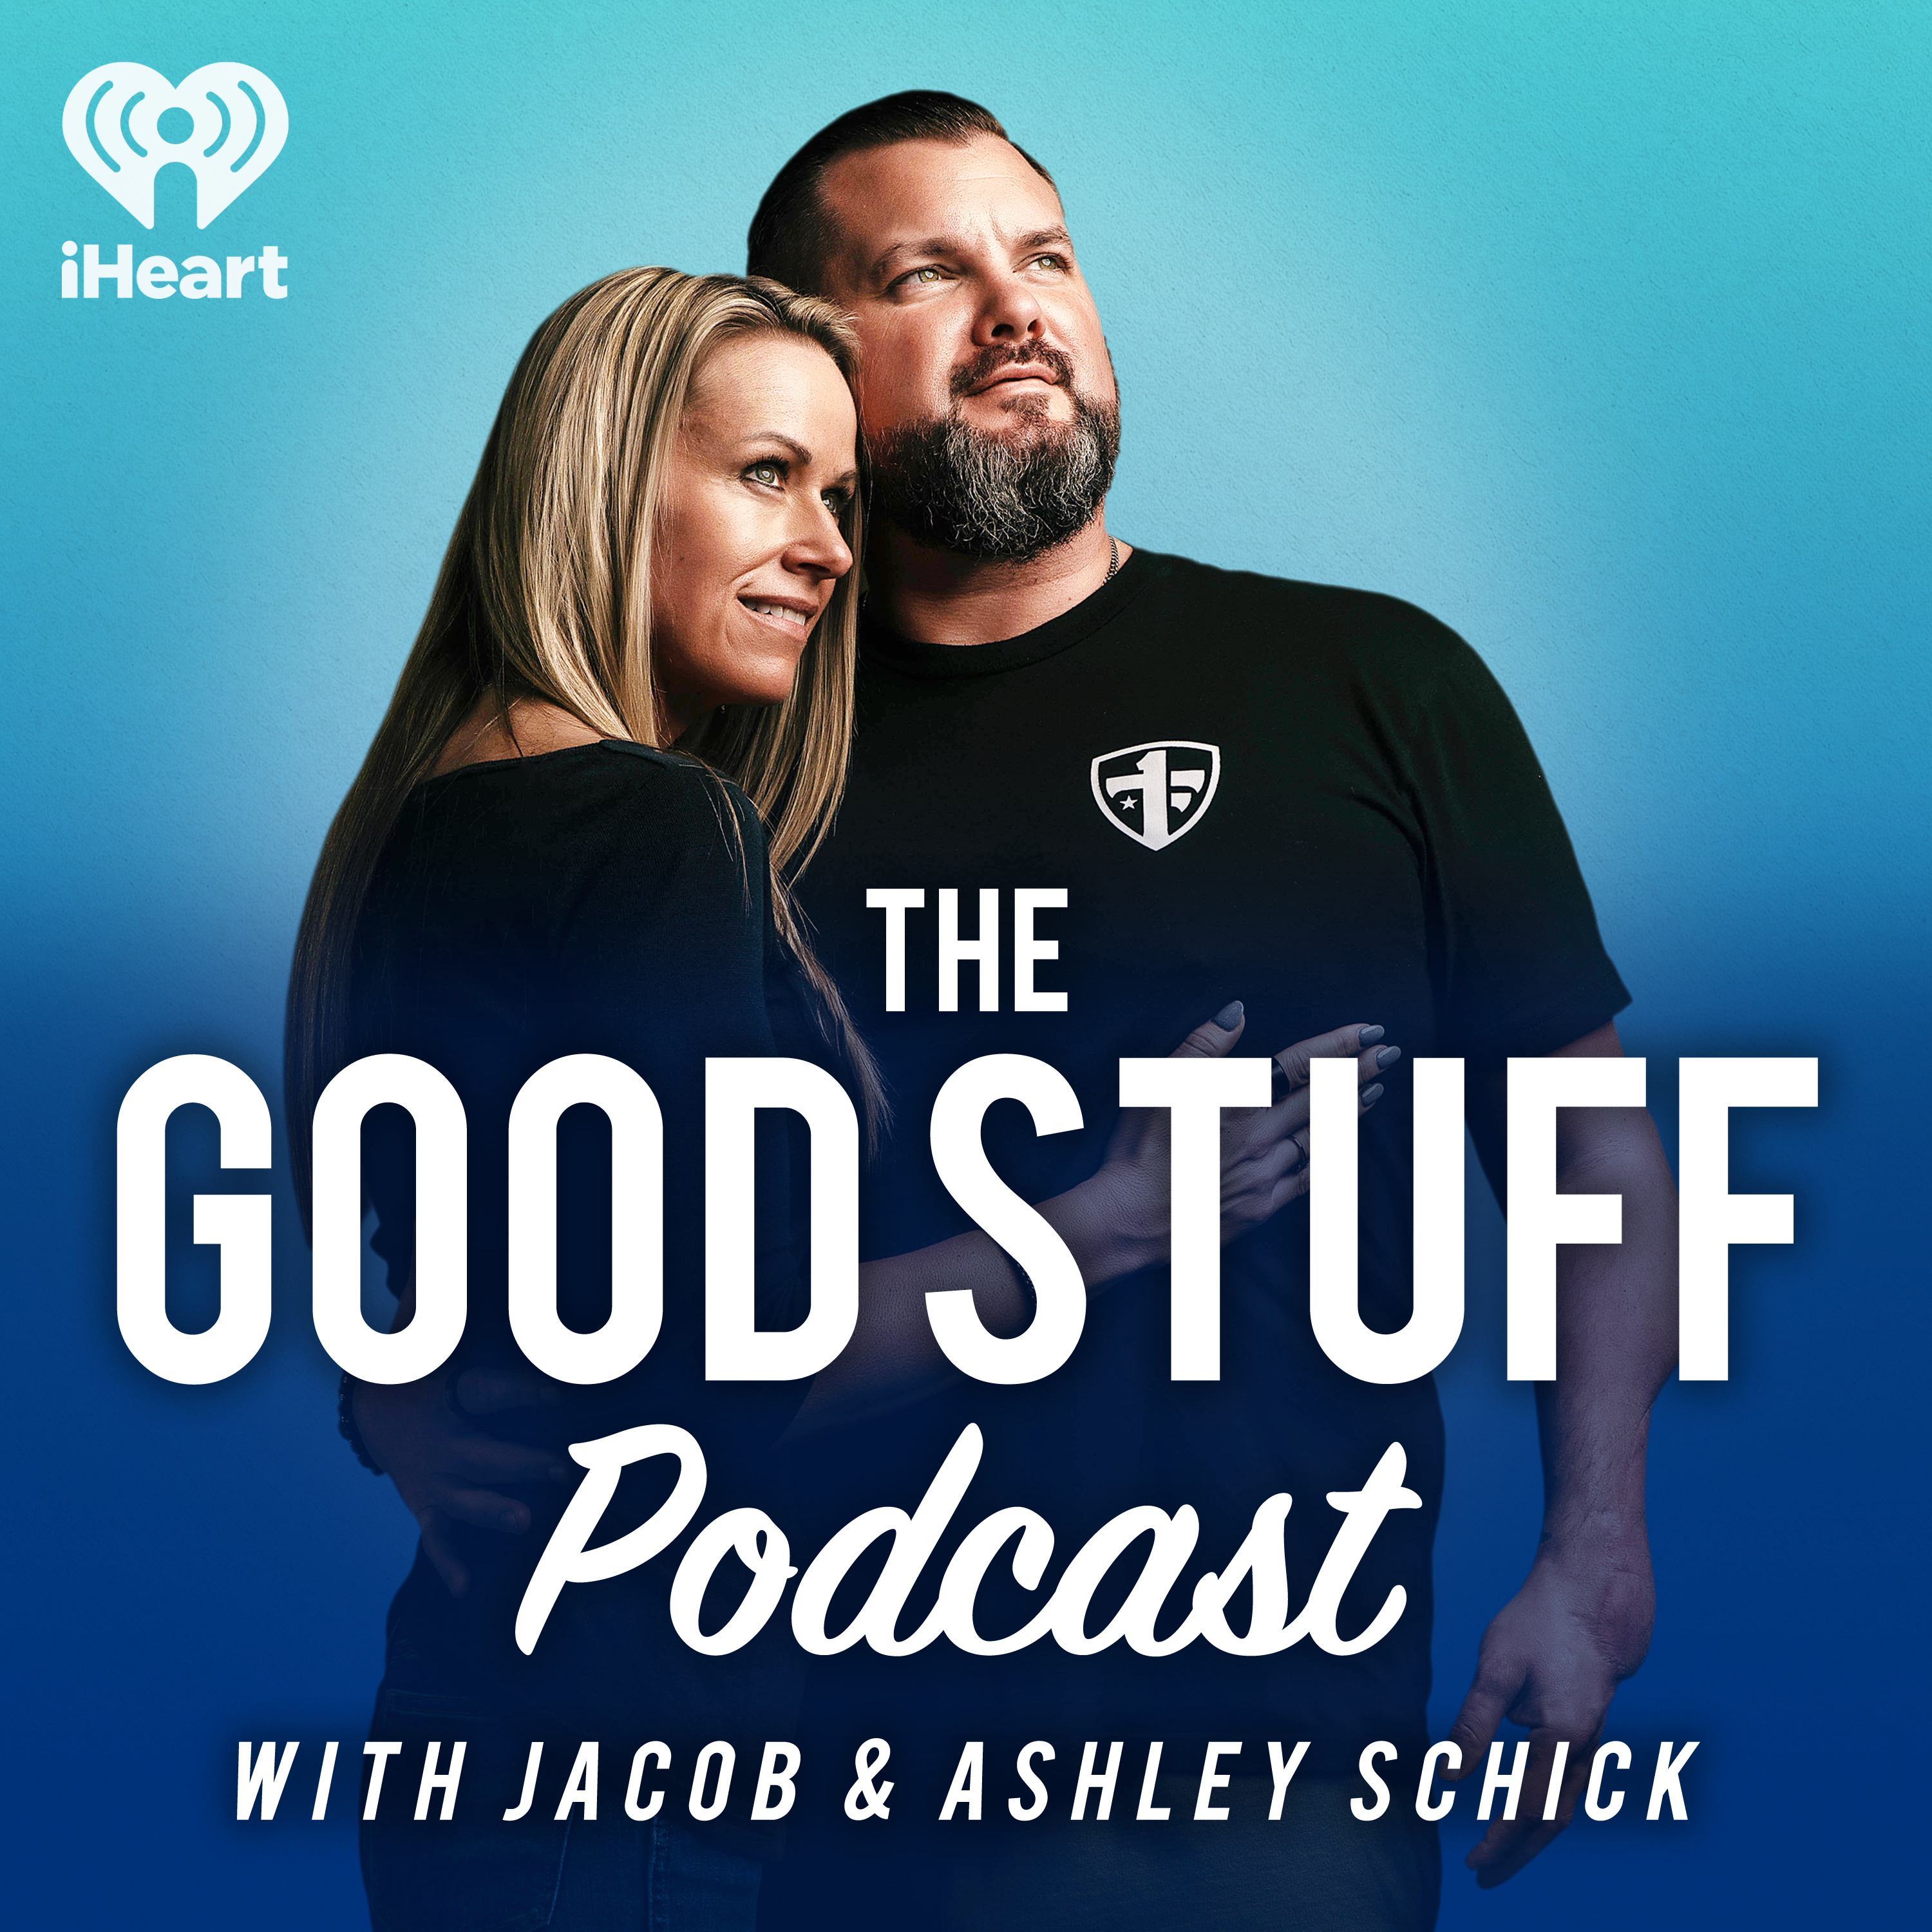 The Good Stuff Podcast podcast show image